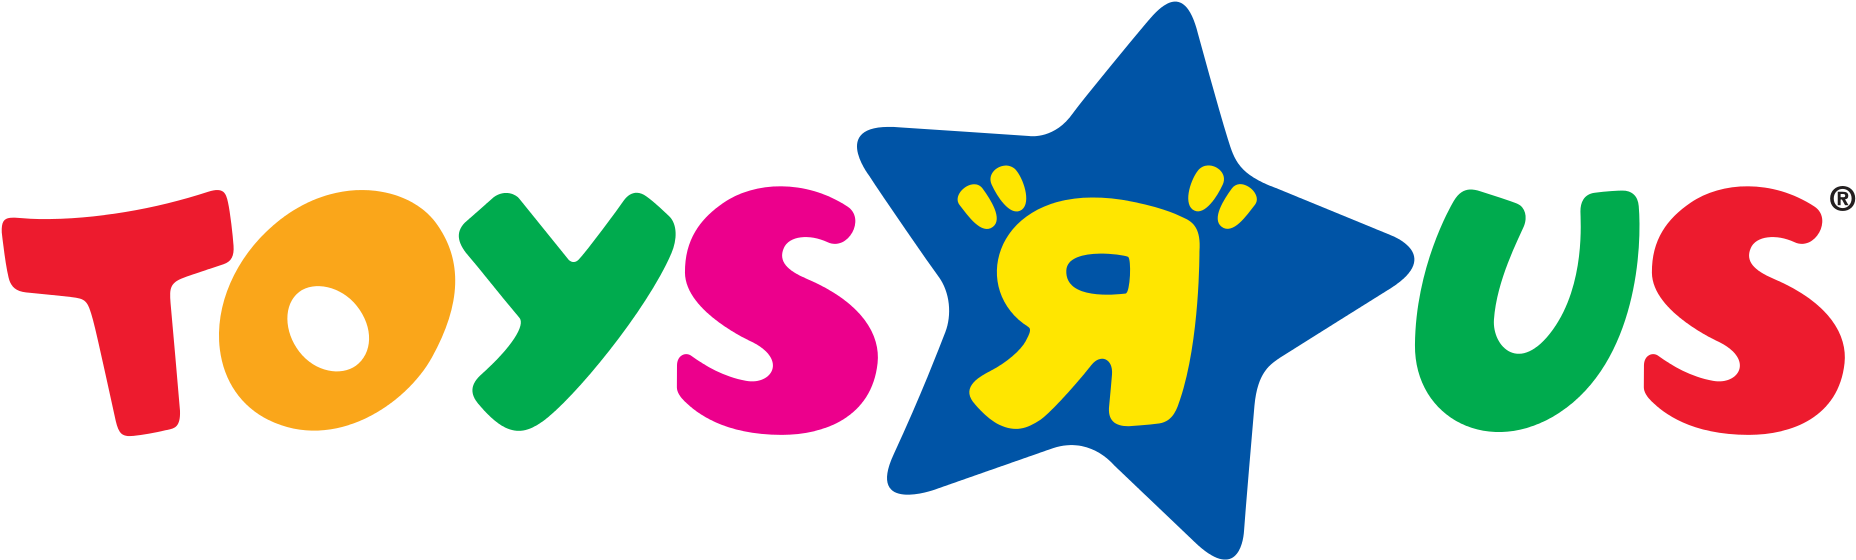 Toys R Us - Toys R Us Logo Png (2000x601)